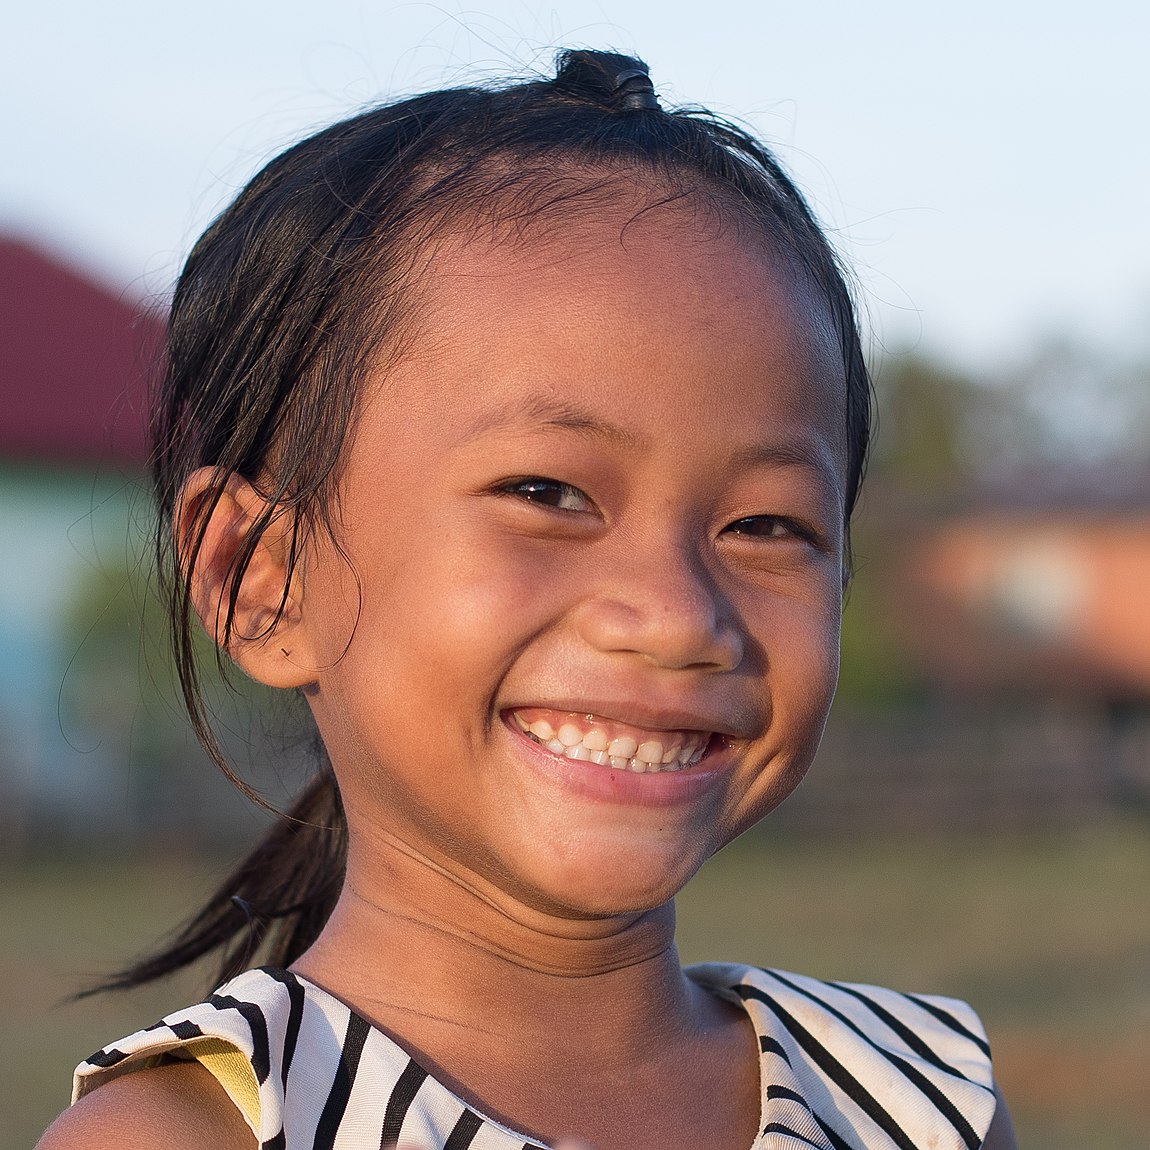 Smiling young girl with deciduous teeth, in Don Som, Laos